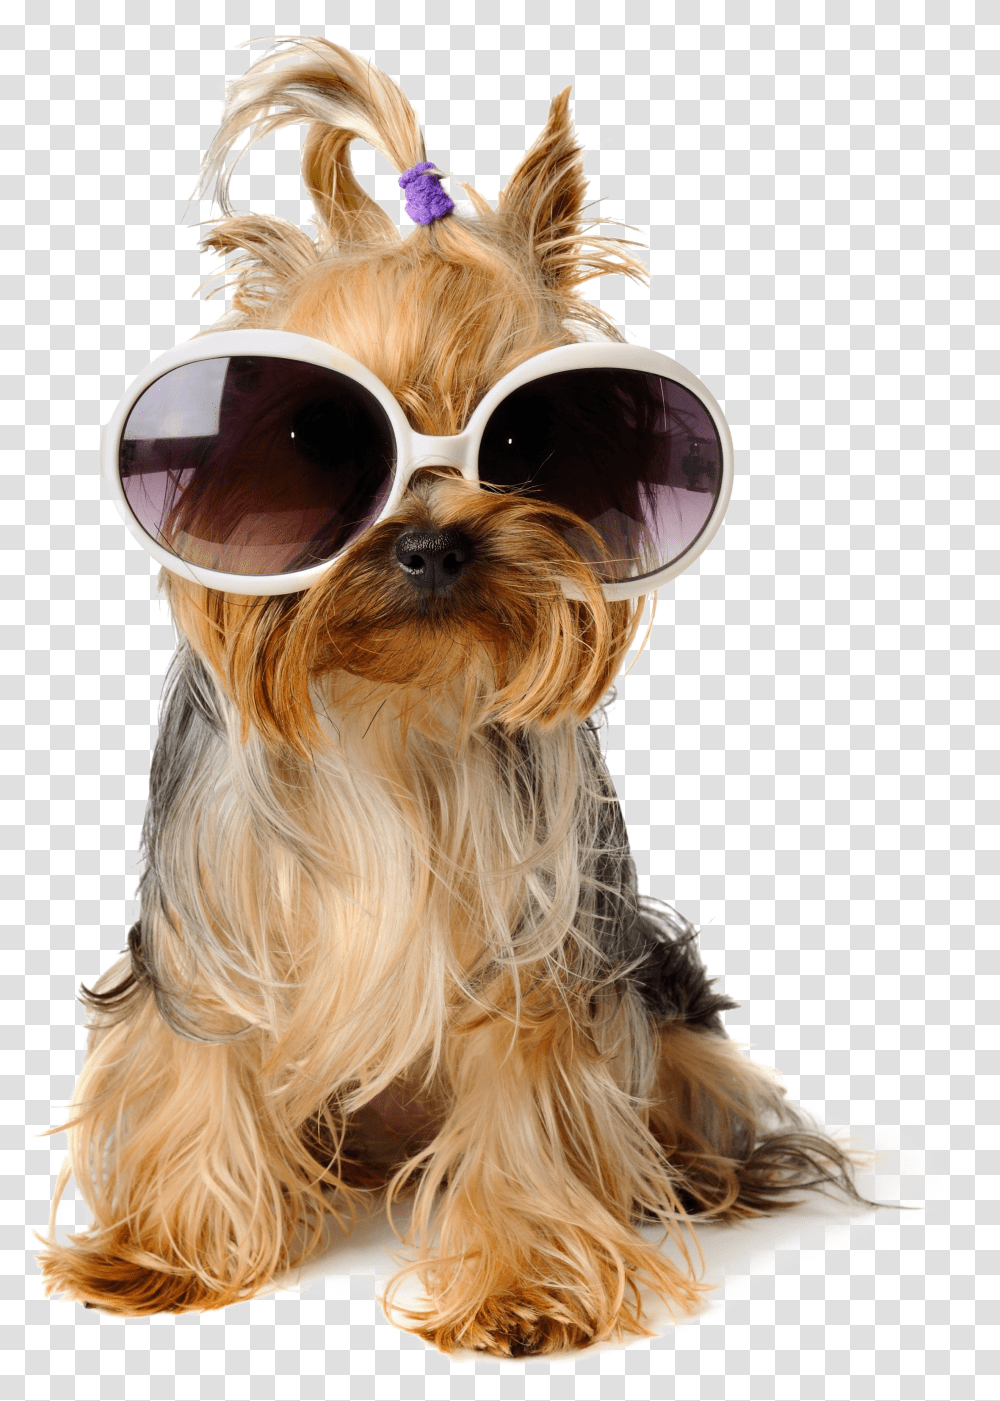 Download Shaggy Sitting Pet Greeting Dog Birthday Puppy Dogs With Sunglasses Clipart Transparent Png